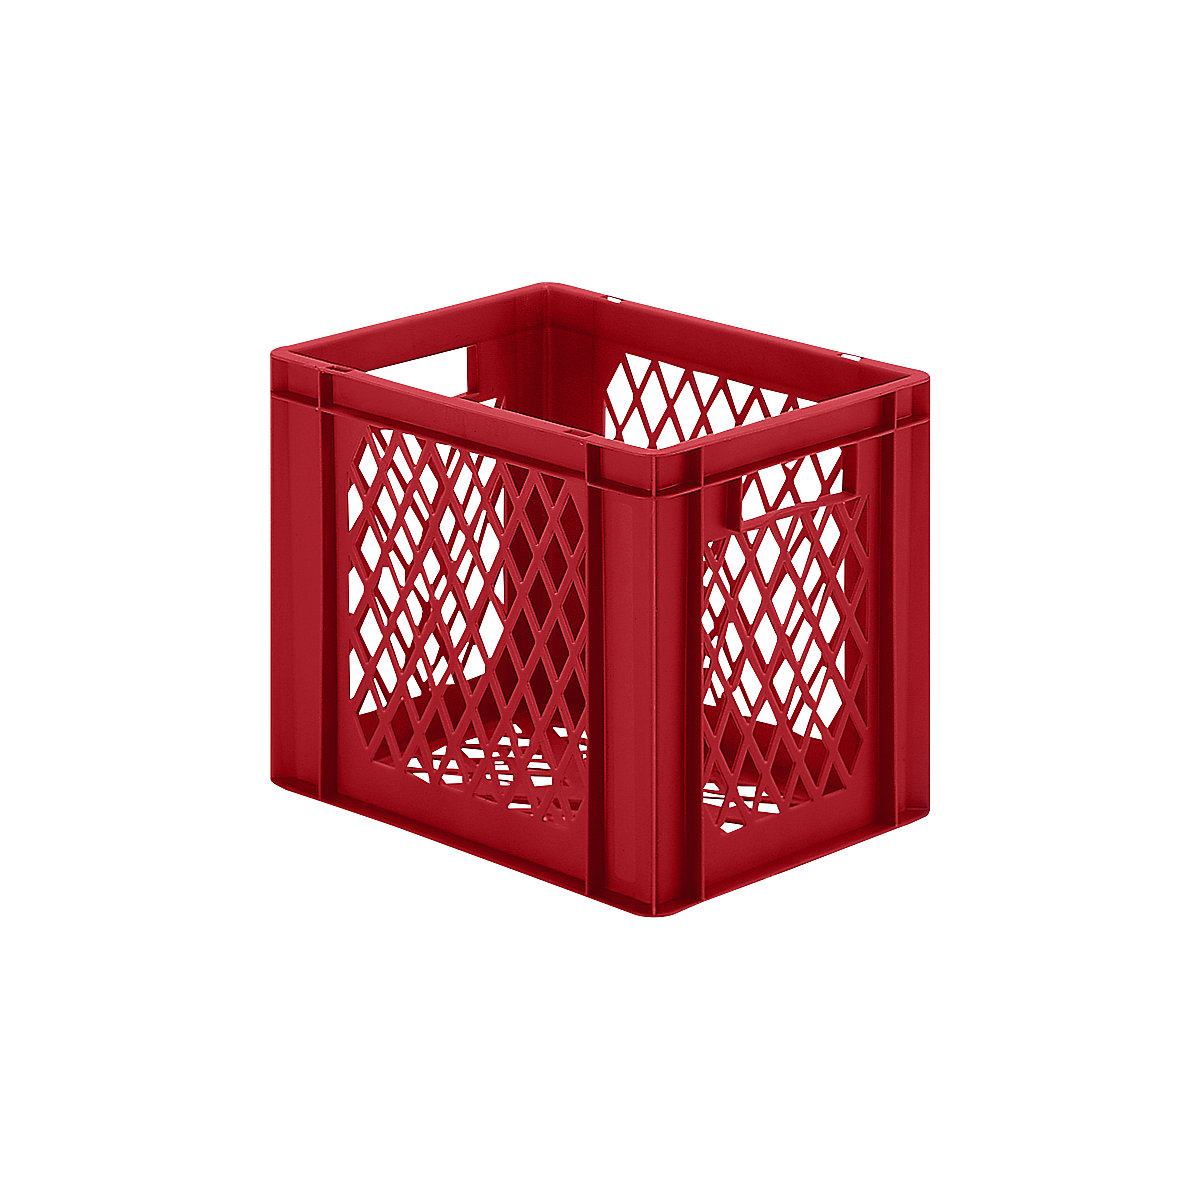 Euro stacking container, perforated walls and base, LxWxH 400 x 300 x 320 mm, red, pack of 5